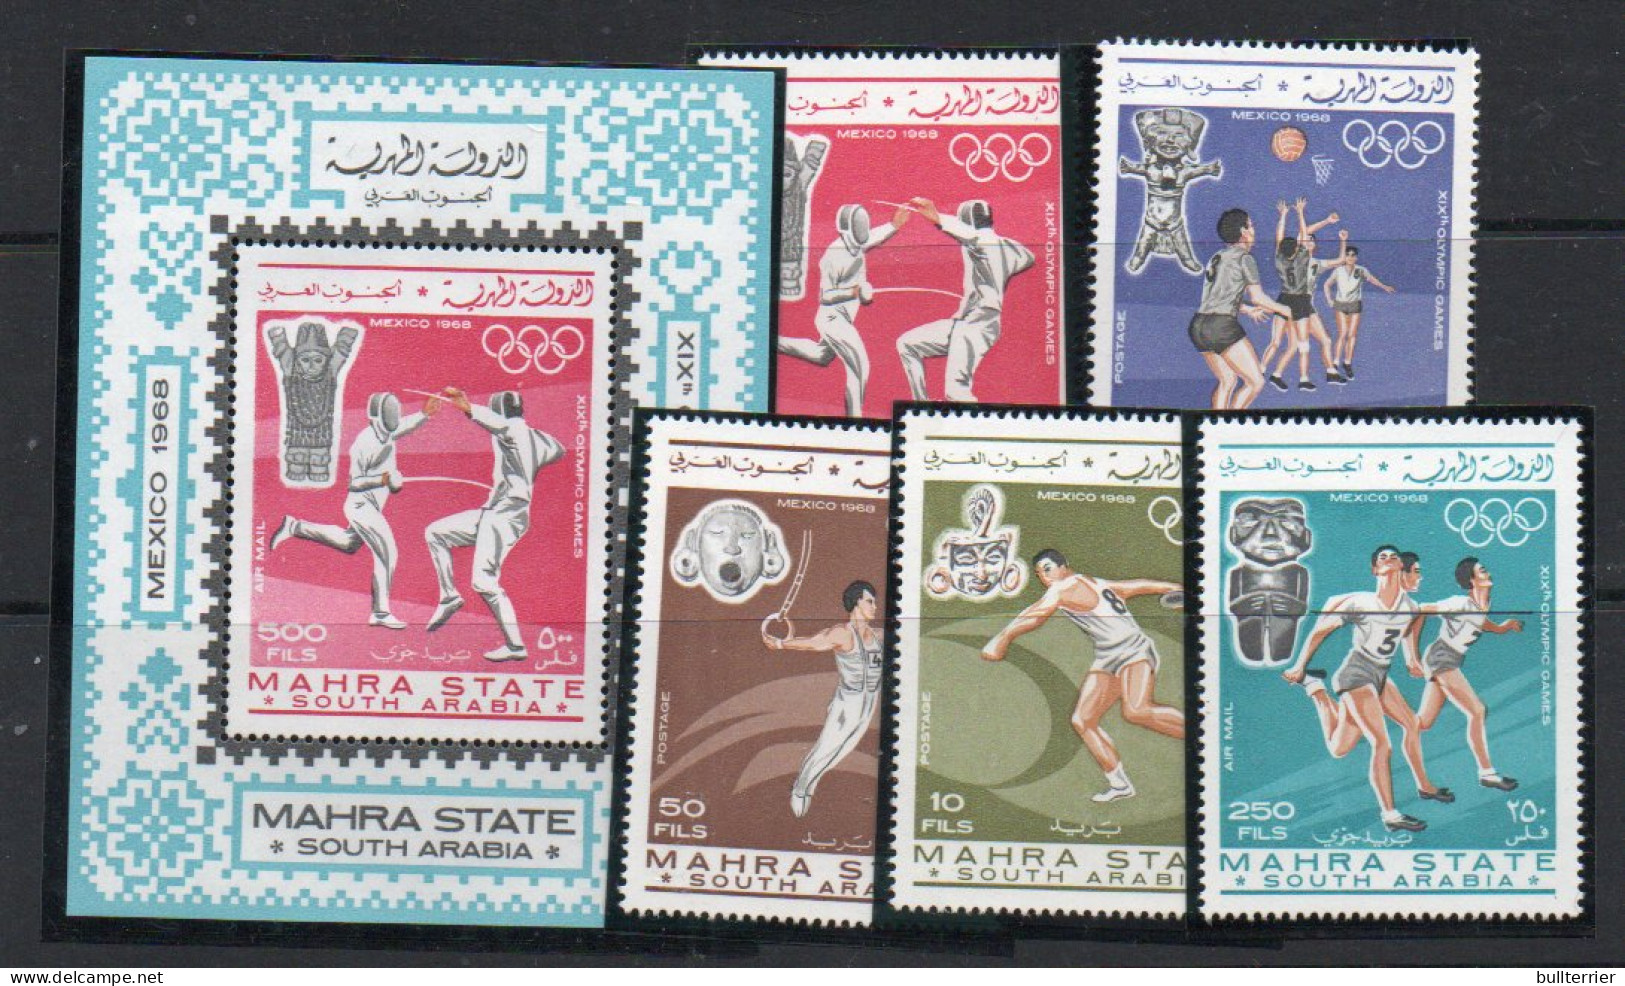 OLYMPICS -  MAHRA STATE - 1967 - MEXICO OLYMPICS SET OF 5 + S/SHEET PERF (mic 25/29 +bl2a)  MINT NEVER HINGED,  - Summer 1968: Mexico City